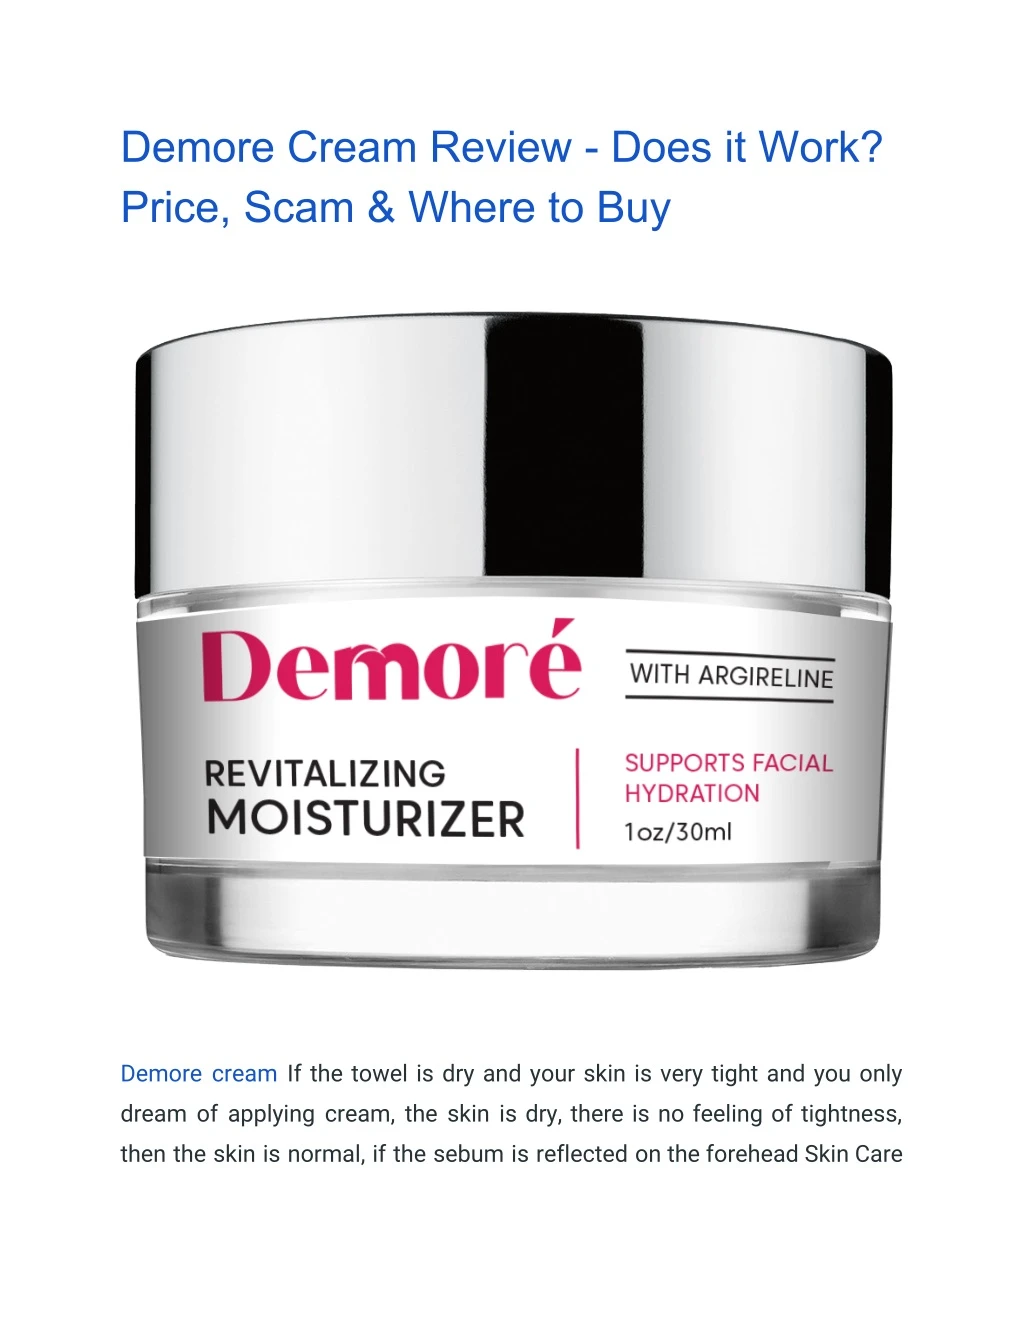 demore cream review does it work price scam where